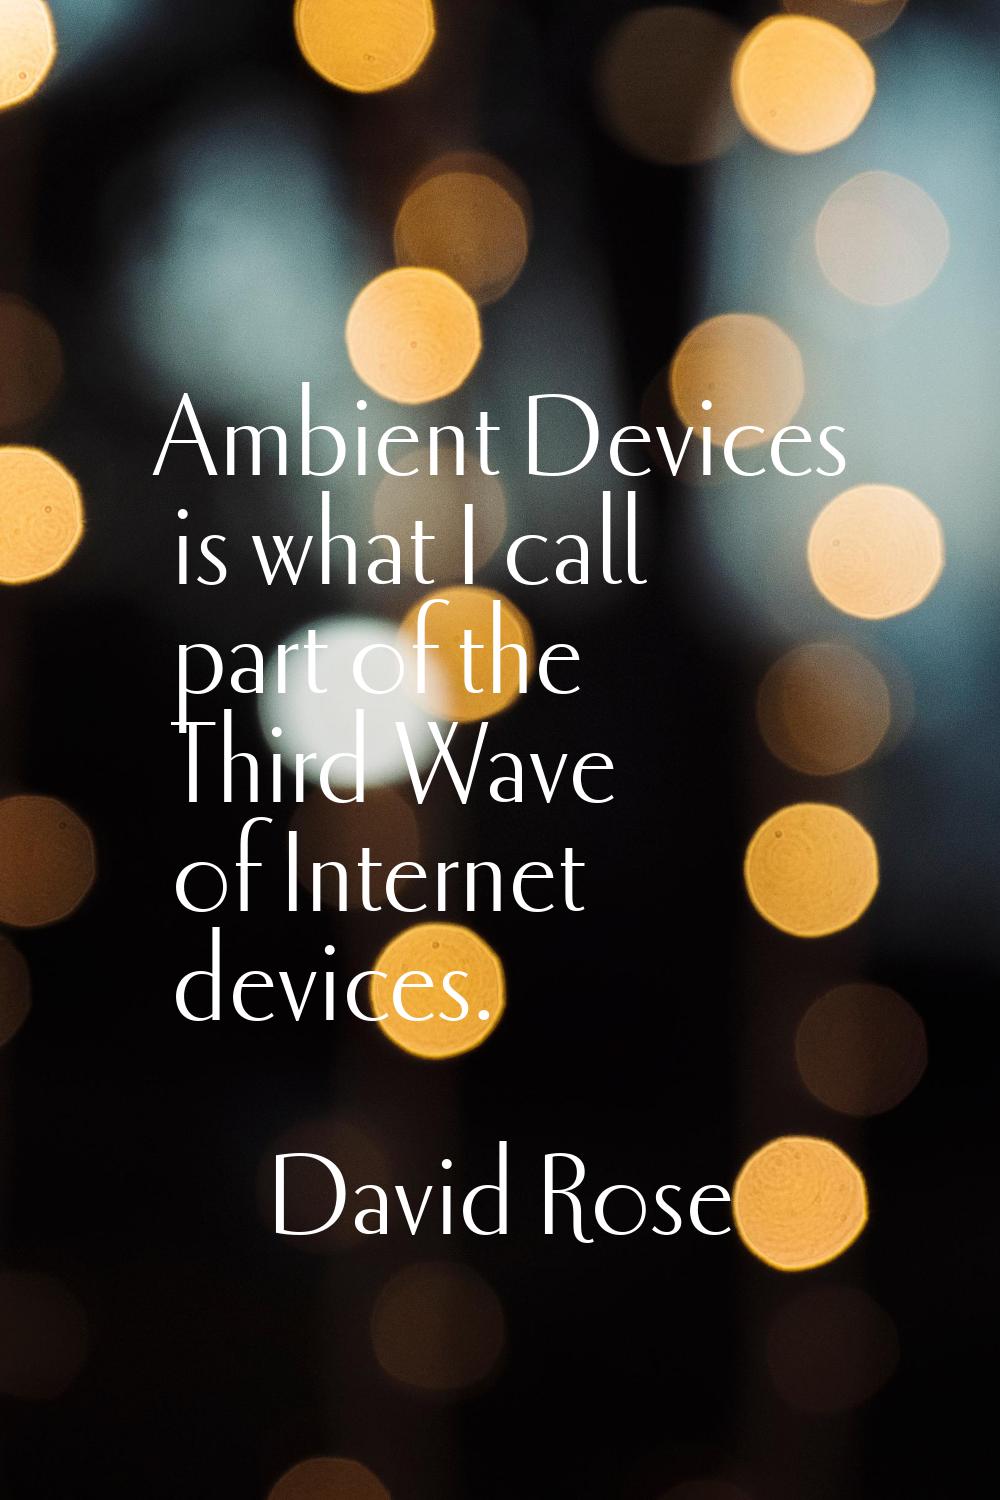 Ambient Devices is what I call part of the Third Wave of Internet devices.